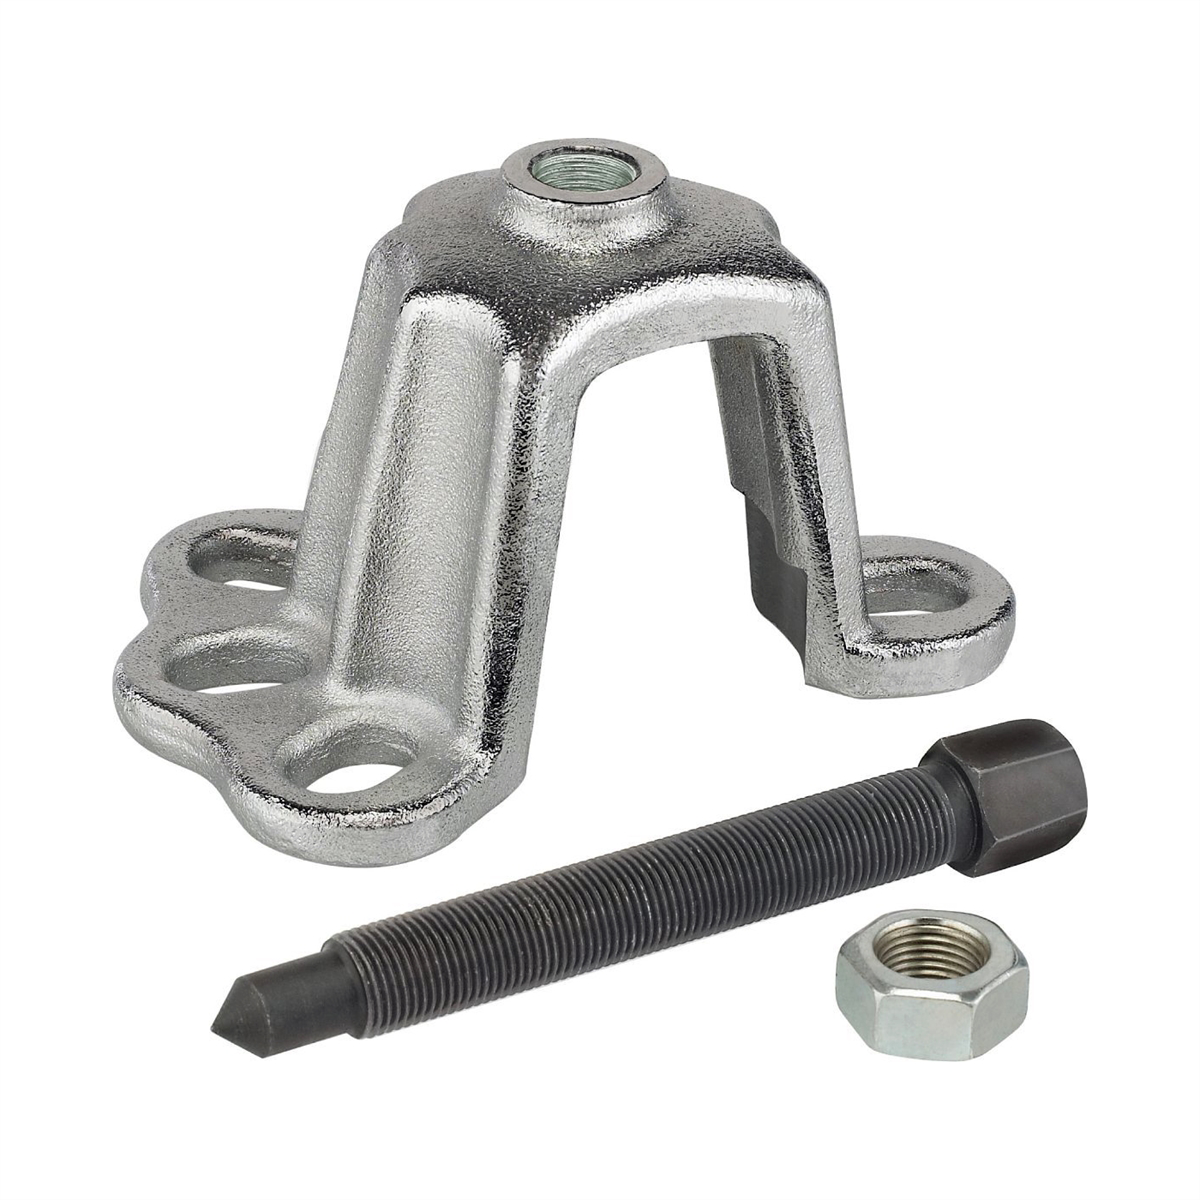 Front Wheel Hub Puller for Small to Midsize Lug Patterns